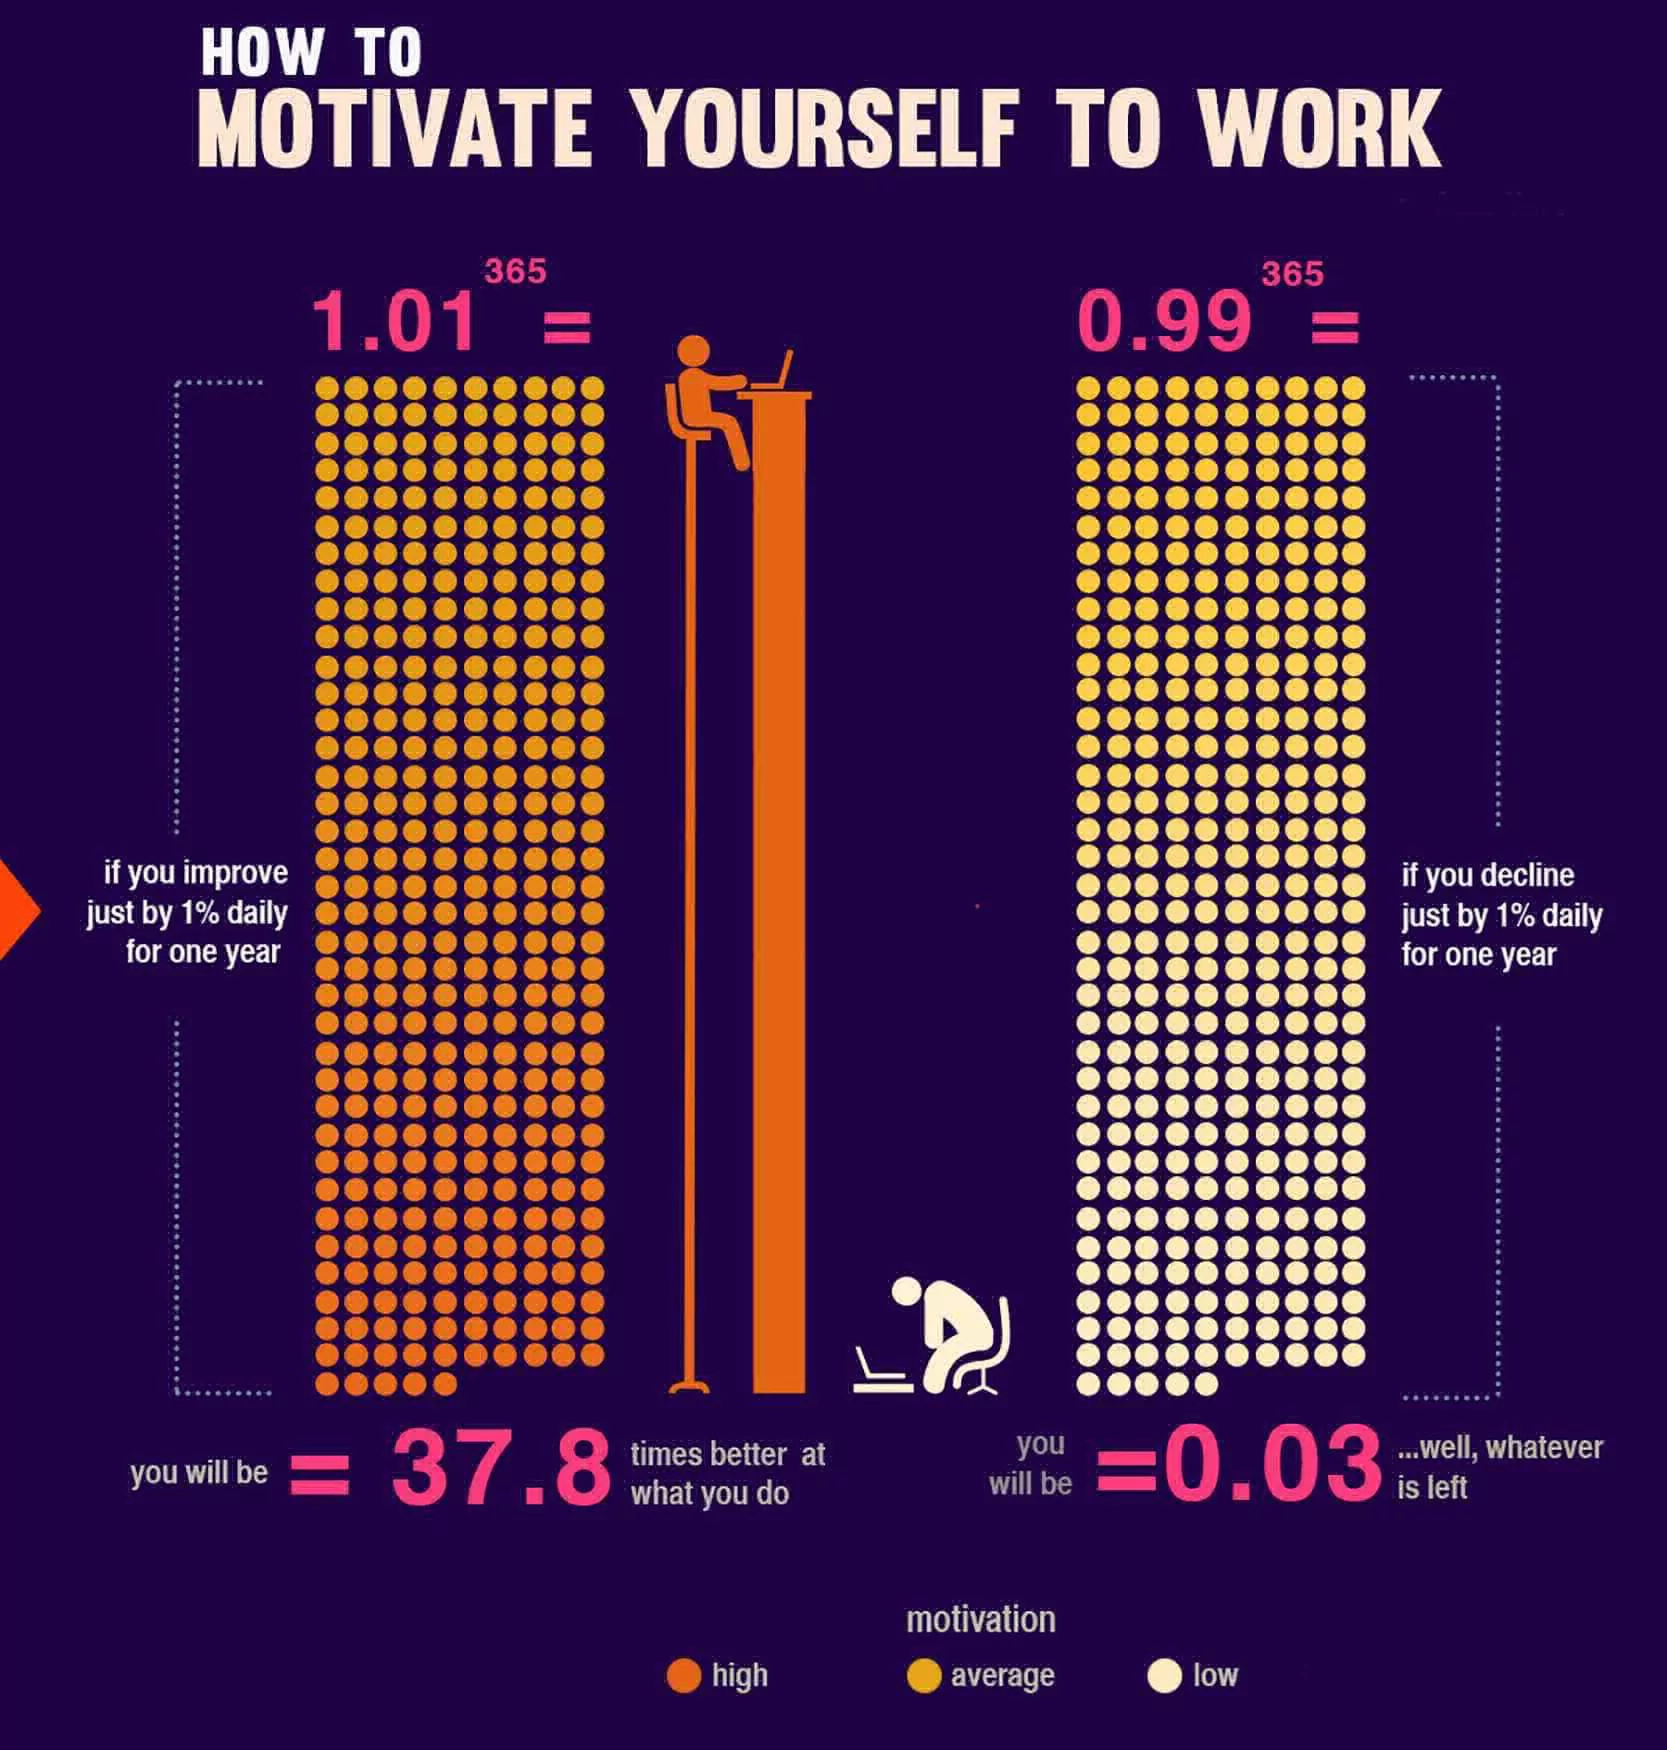 How To Motivate Yourself To Work